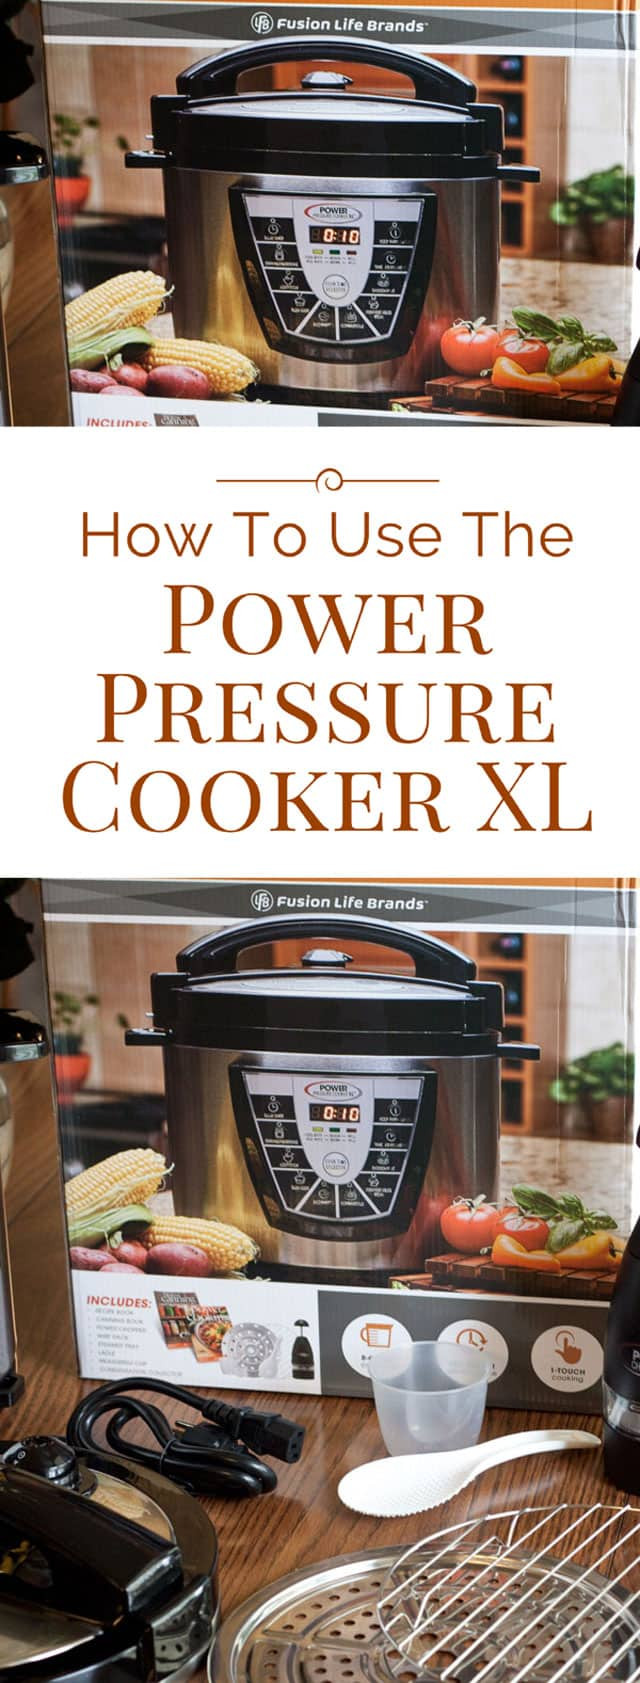 Power Pressure Cooker Xl Fish Recipes
 How to Use the Power Pressure Cooker XL Pressure Cooking